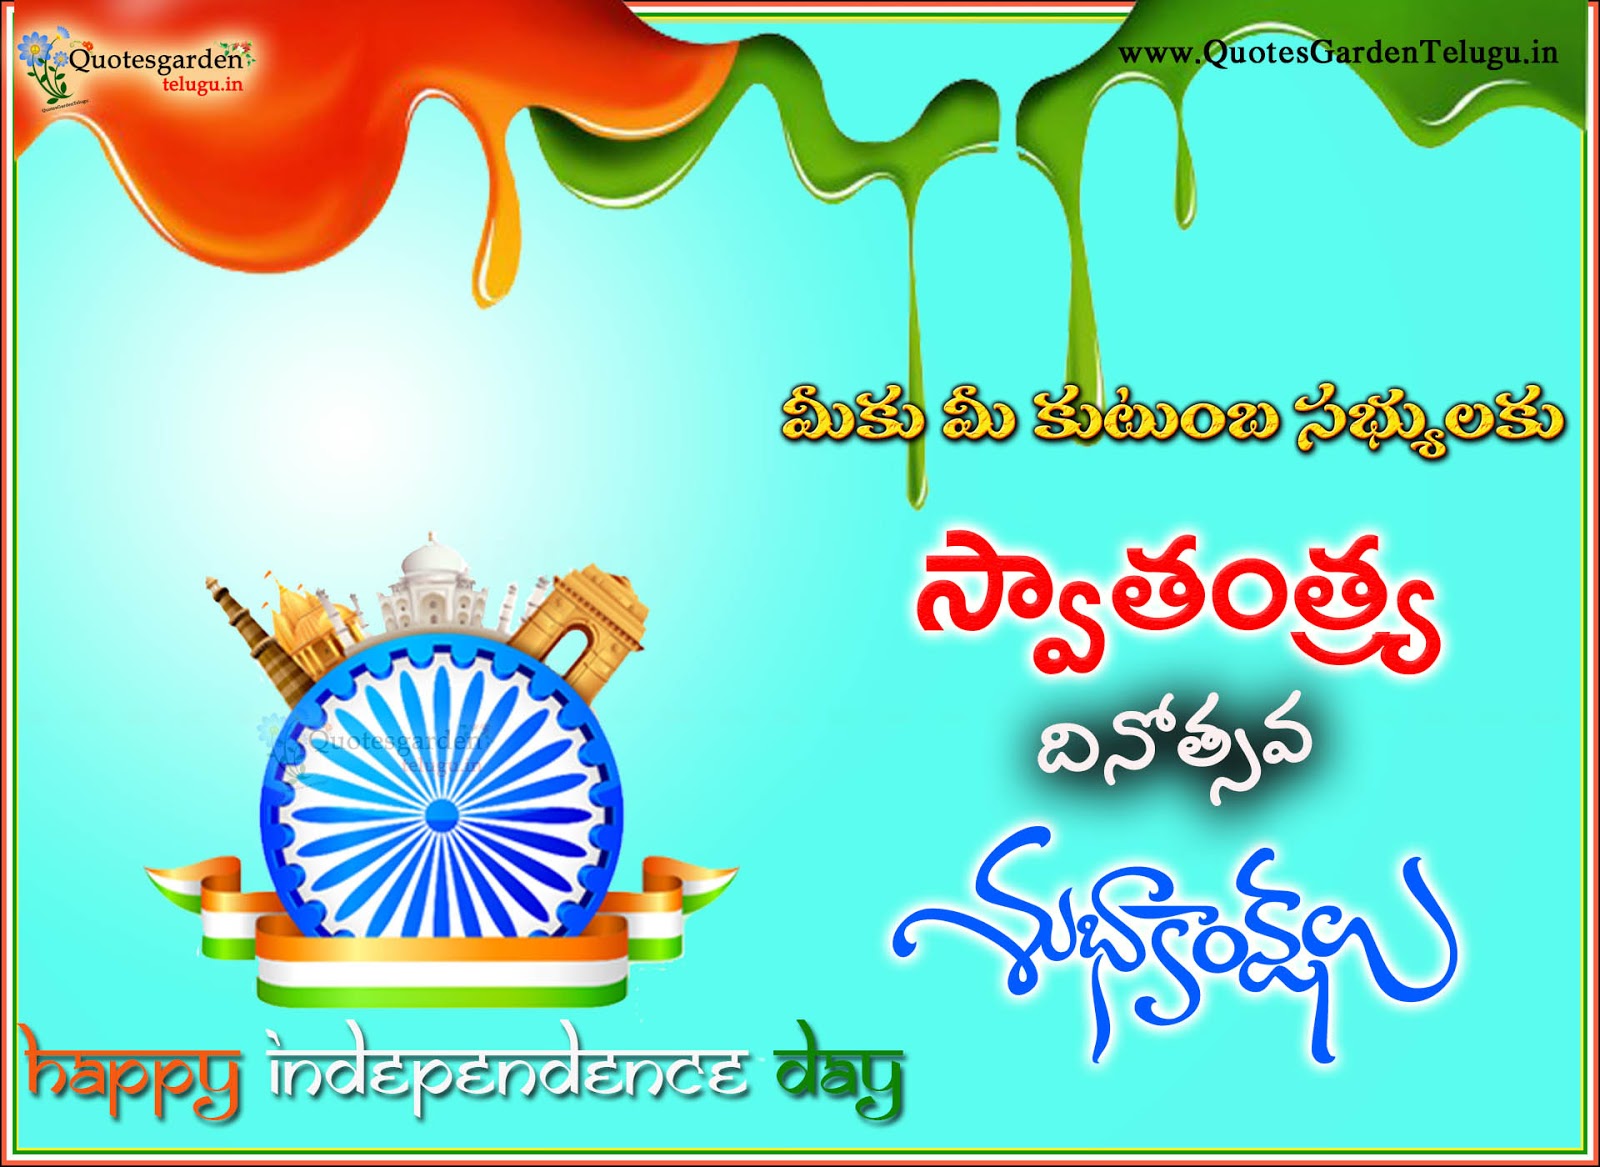 Latest Independence day greetings wishes images in telugu | Like ...